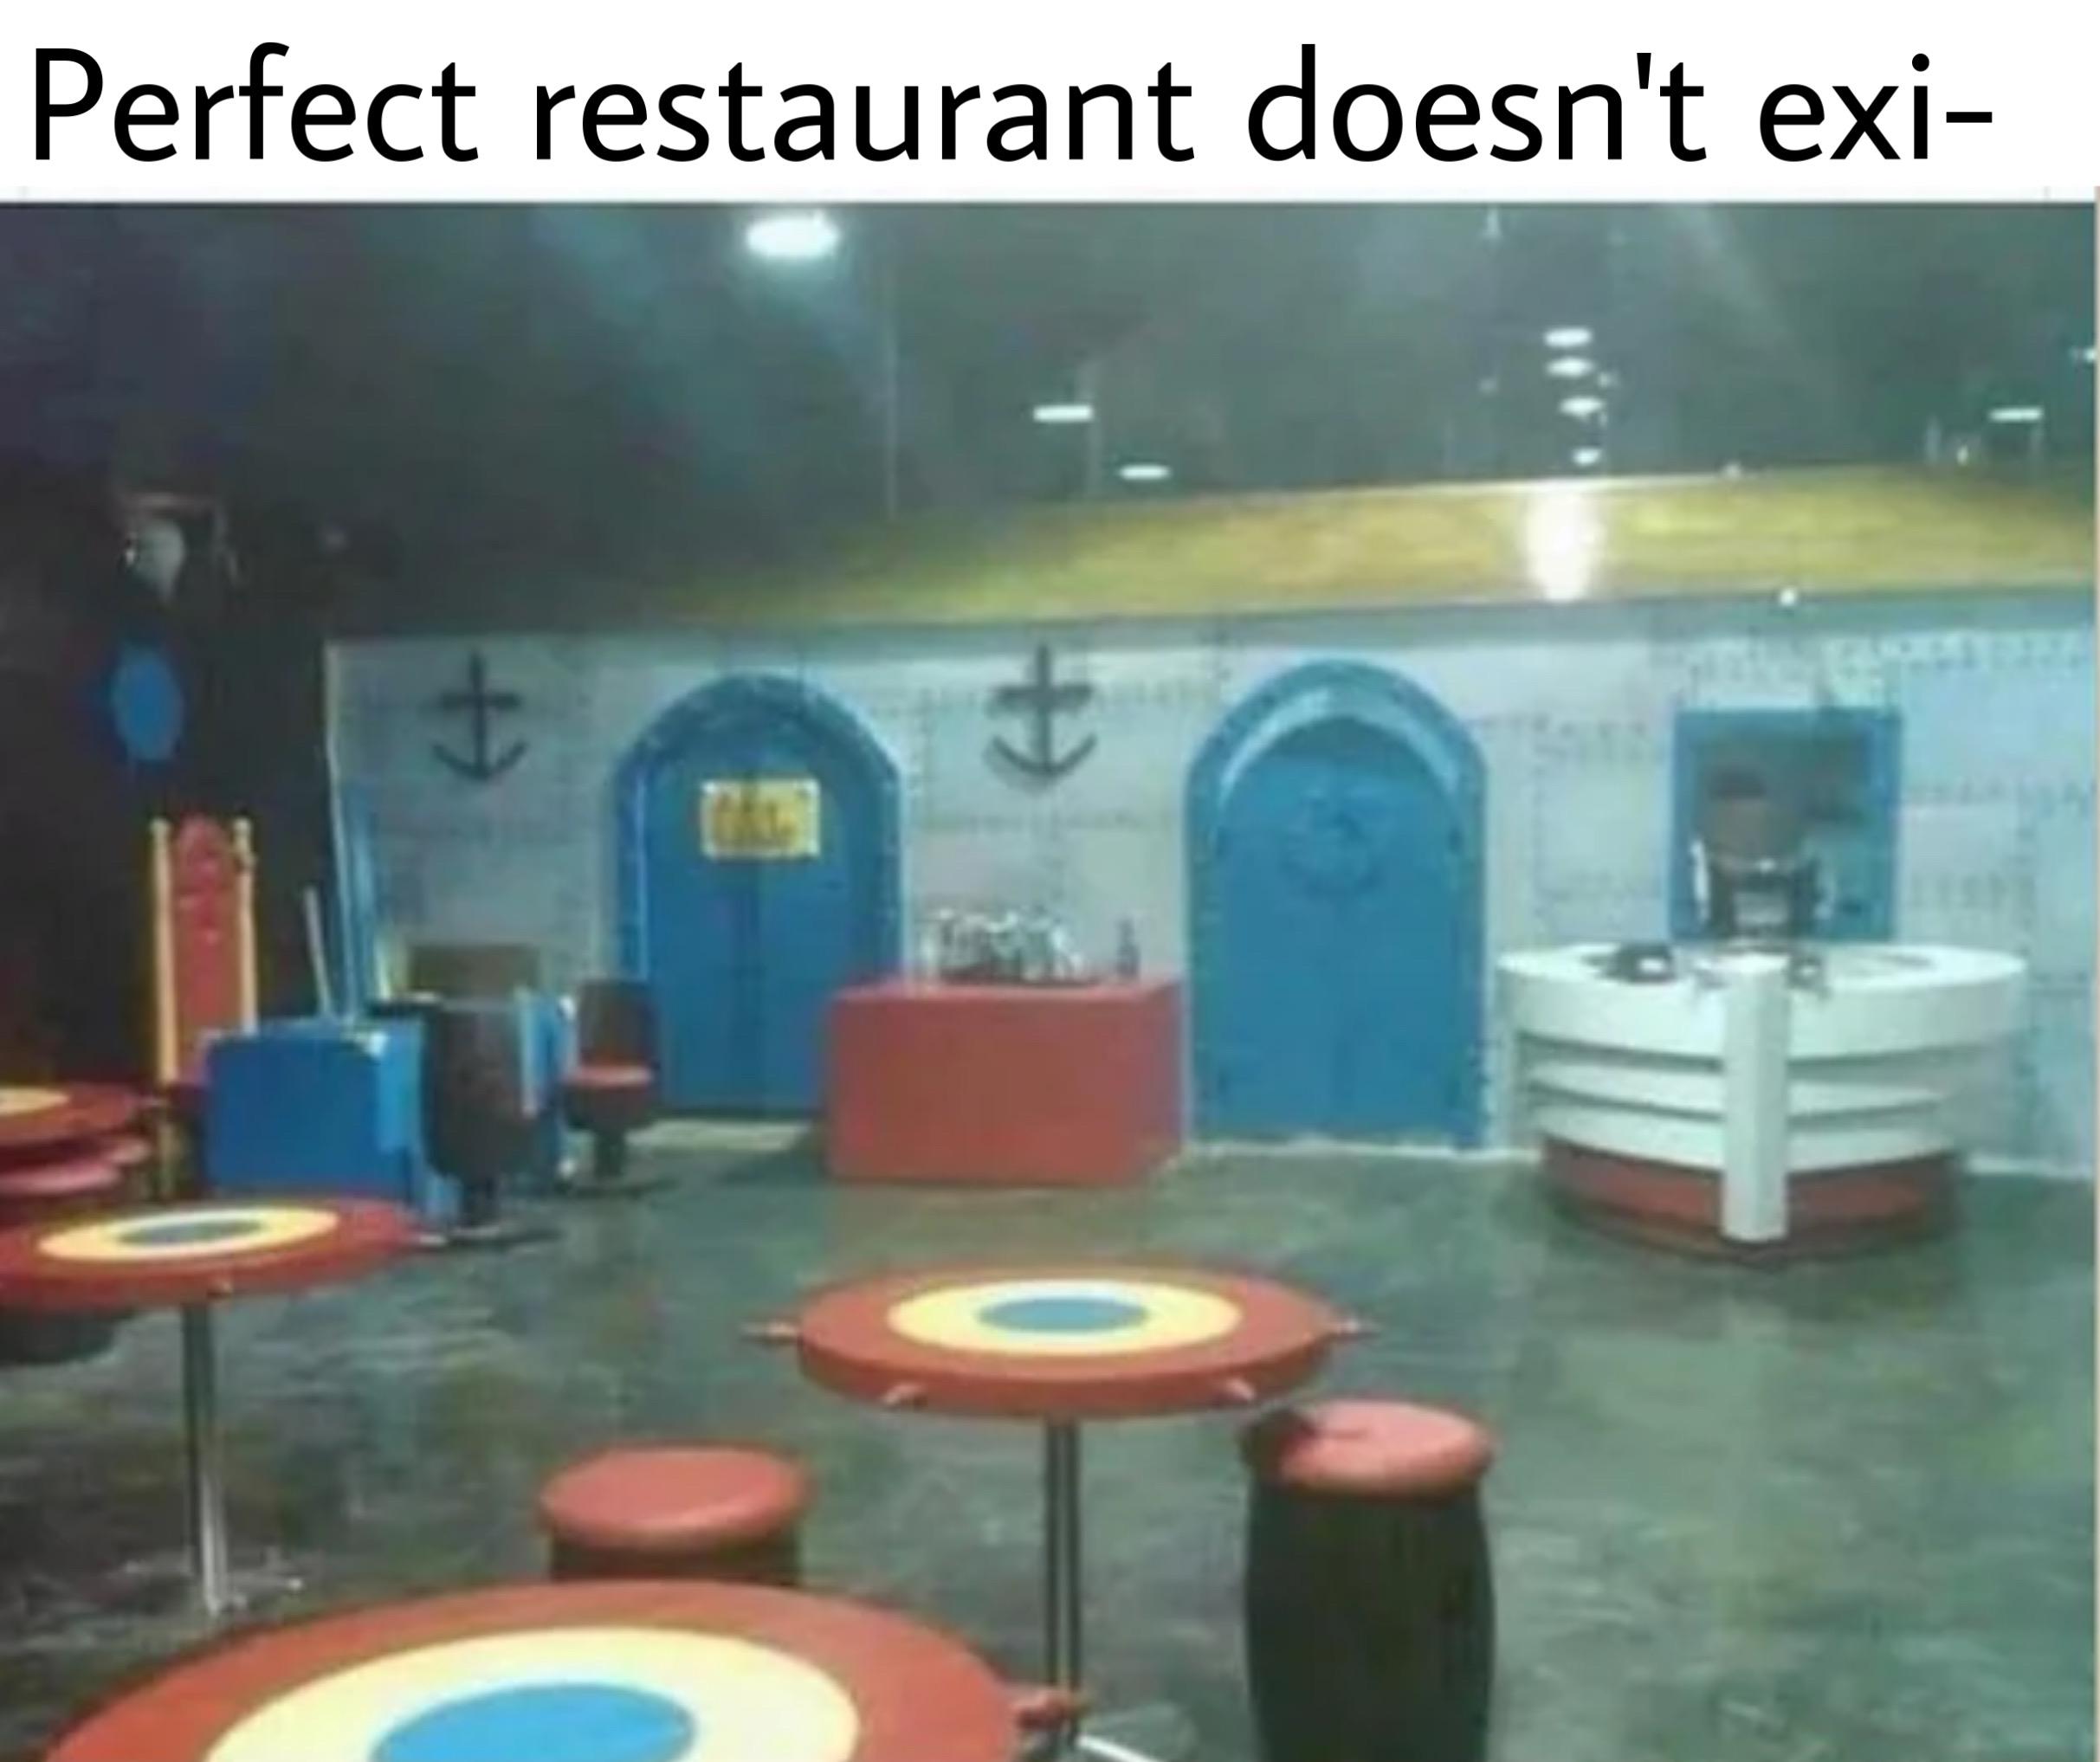 liminal spaces childhood - Perfect restaurant doesn't exi t t